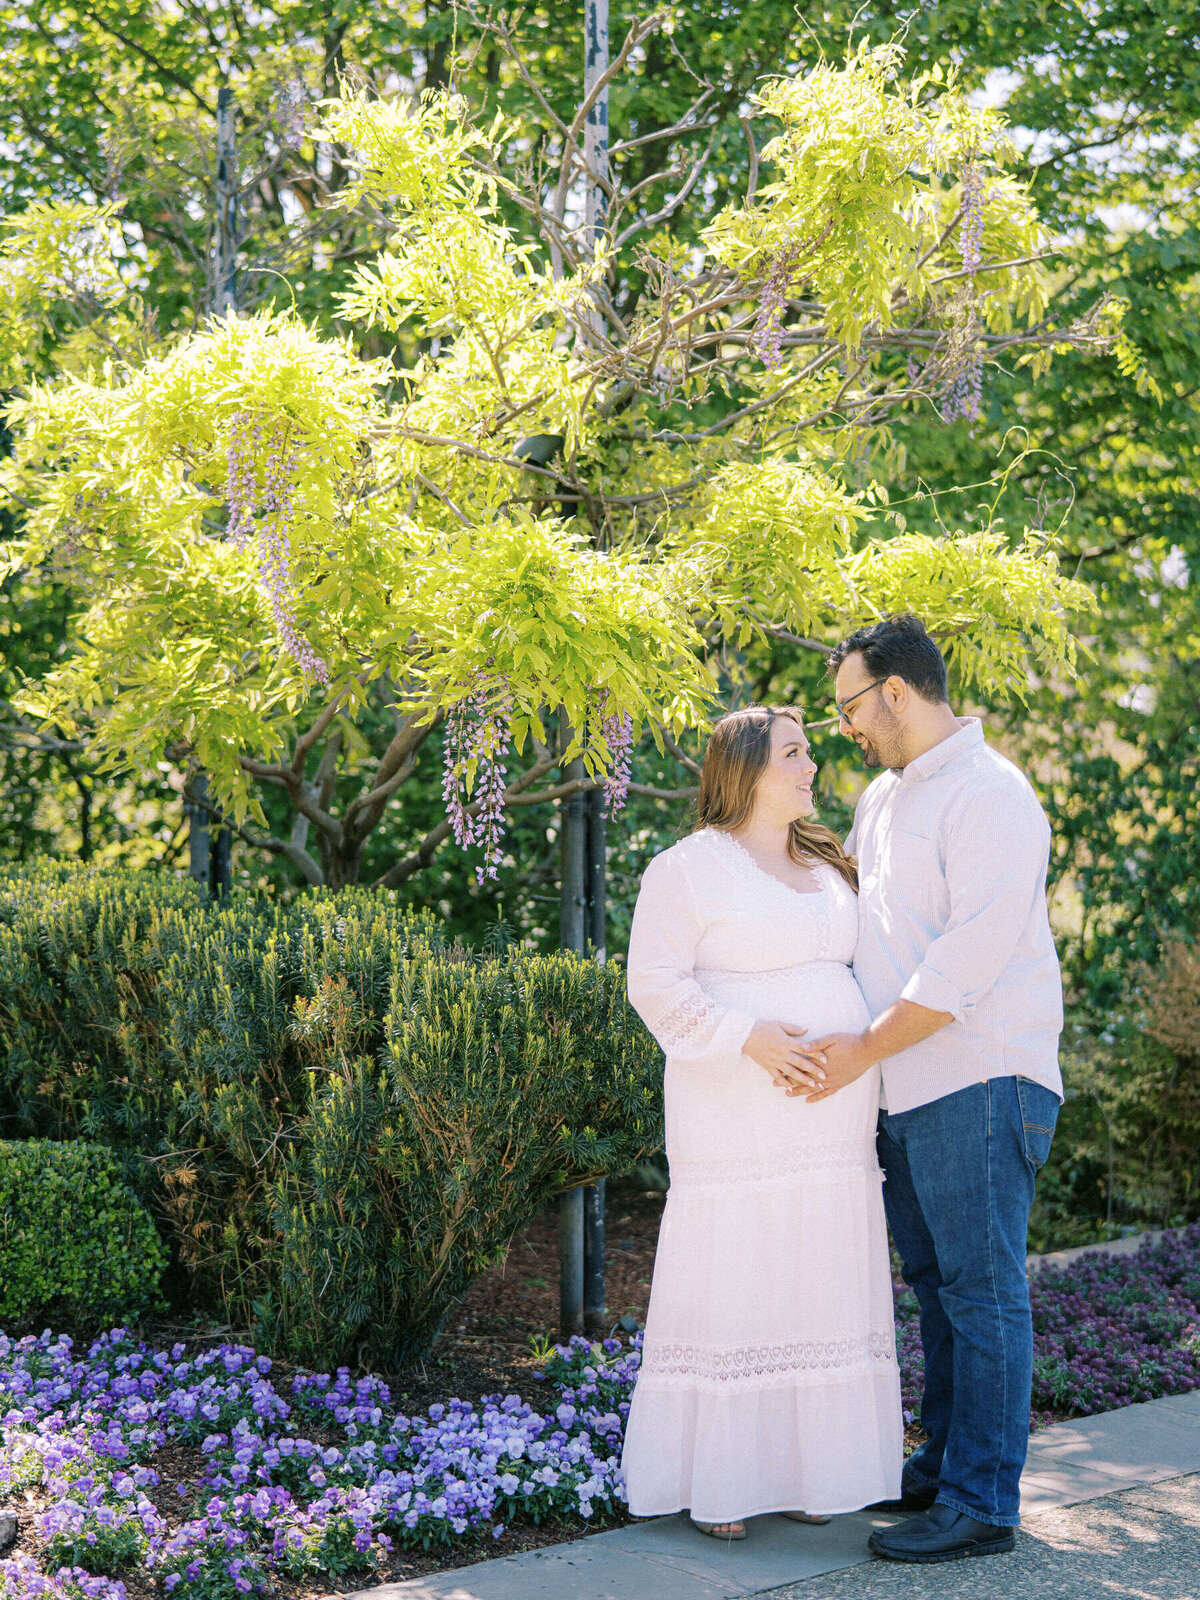 08 Dallas Arboretum Maternity Family Session Kate Panza Photography Kim and Nic